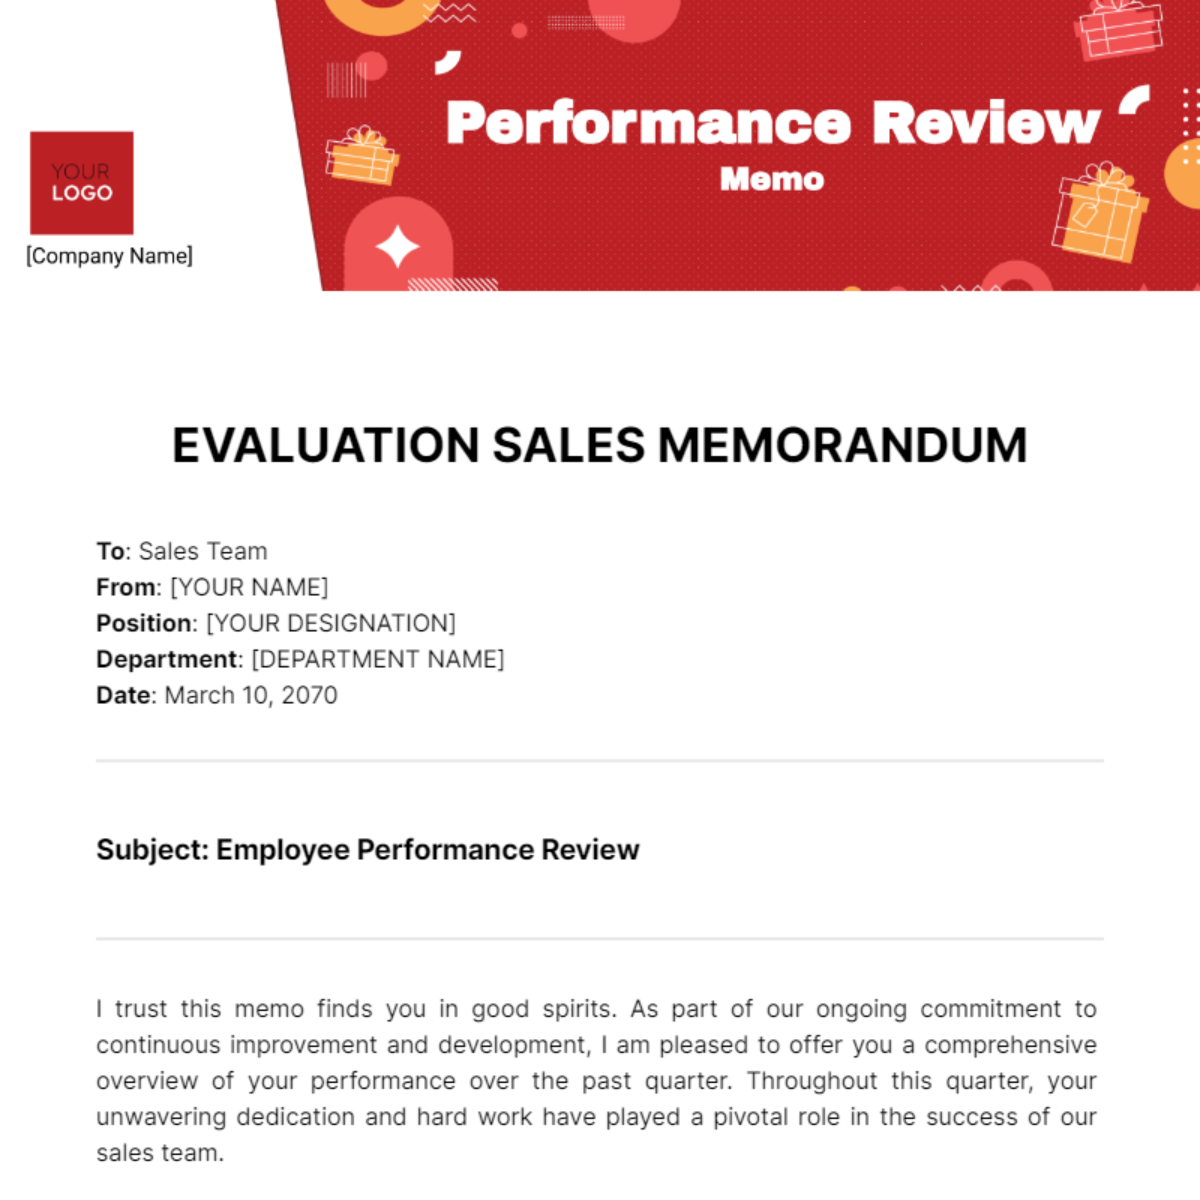 Performance Review Memo Template